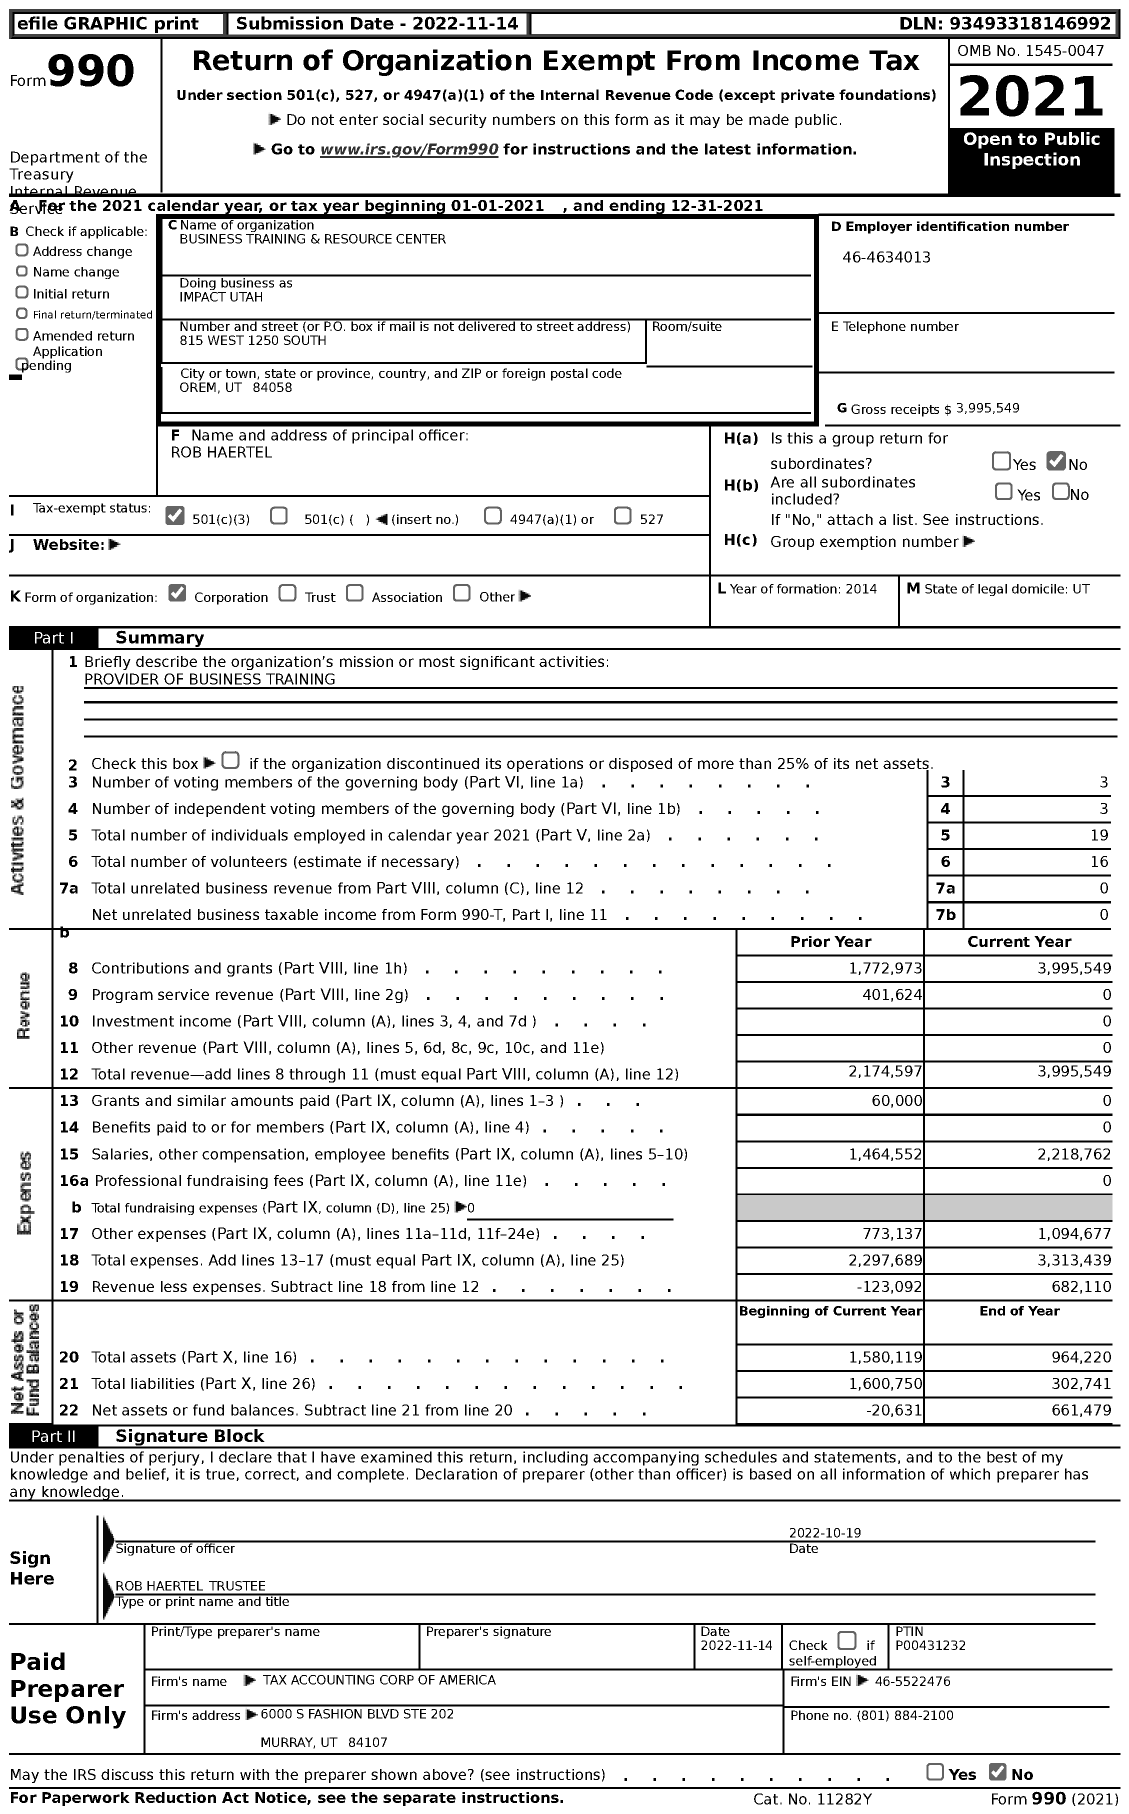 Image of first page of 2021 Form 990 for Impact Utah / Business Training & Resource Center